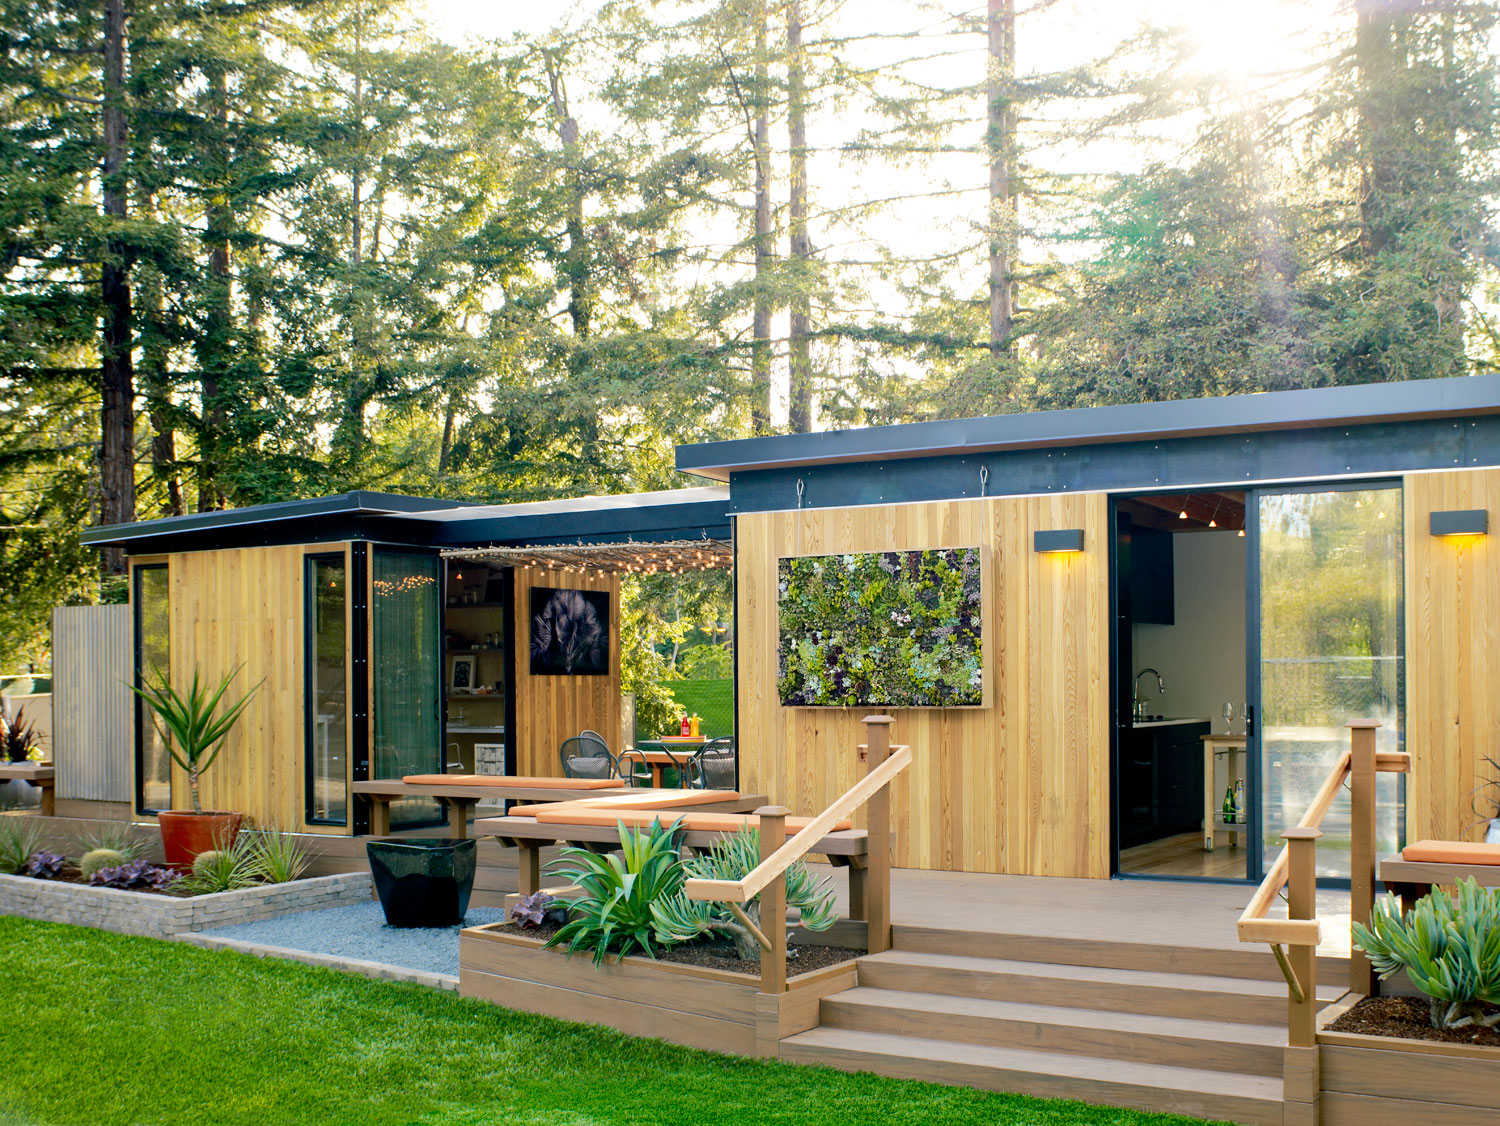 Meet One of Our Favorite Prefab Homes in California - Sunset Magazine